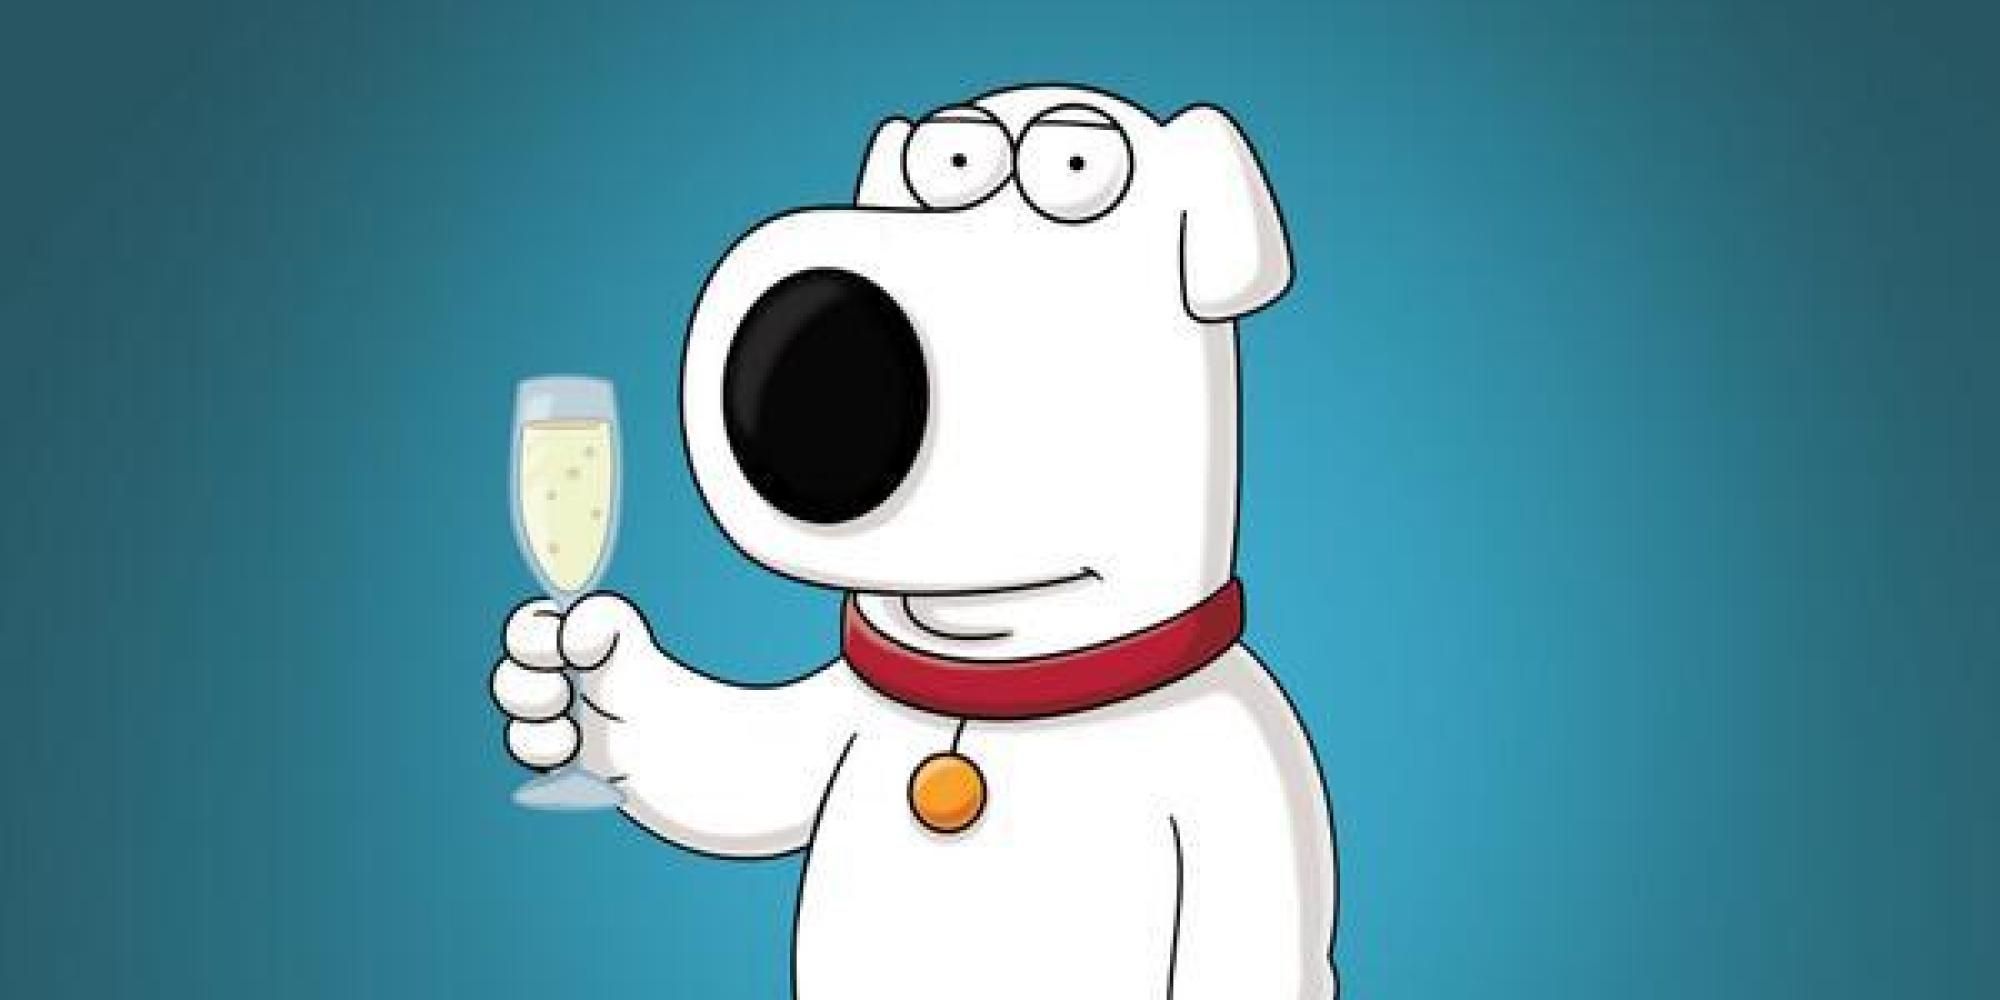 brian griffin family guy quotes